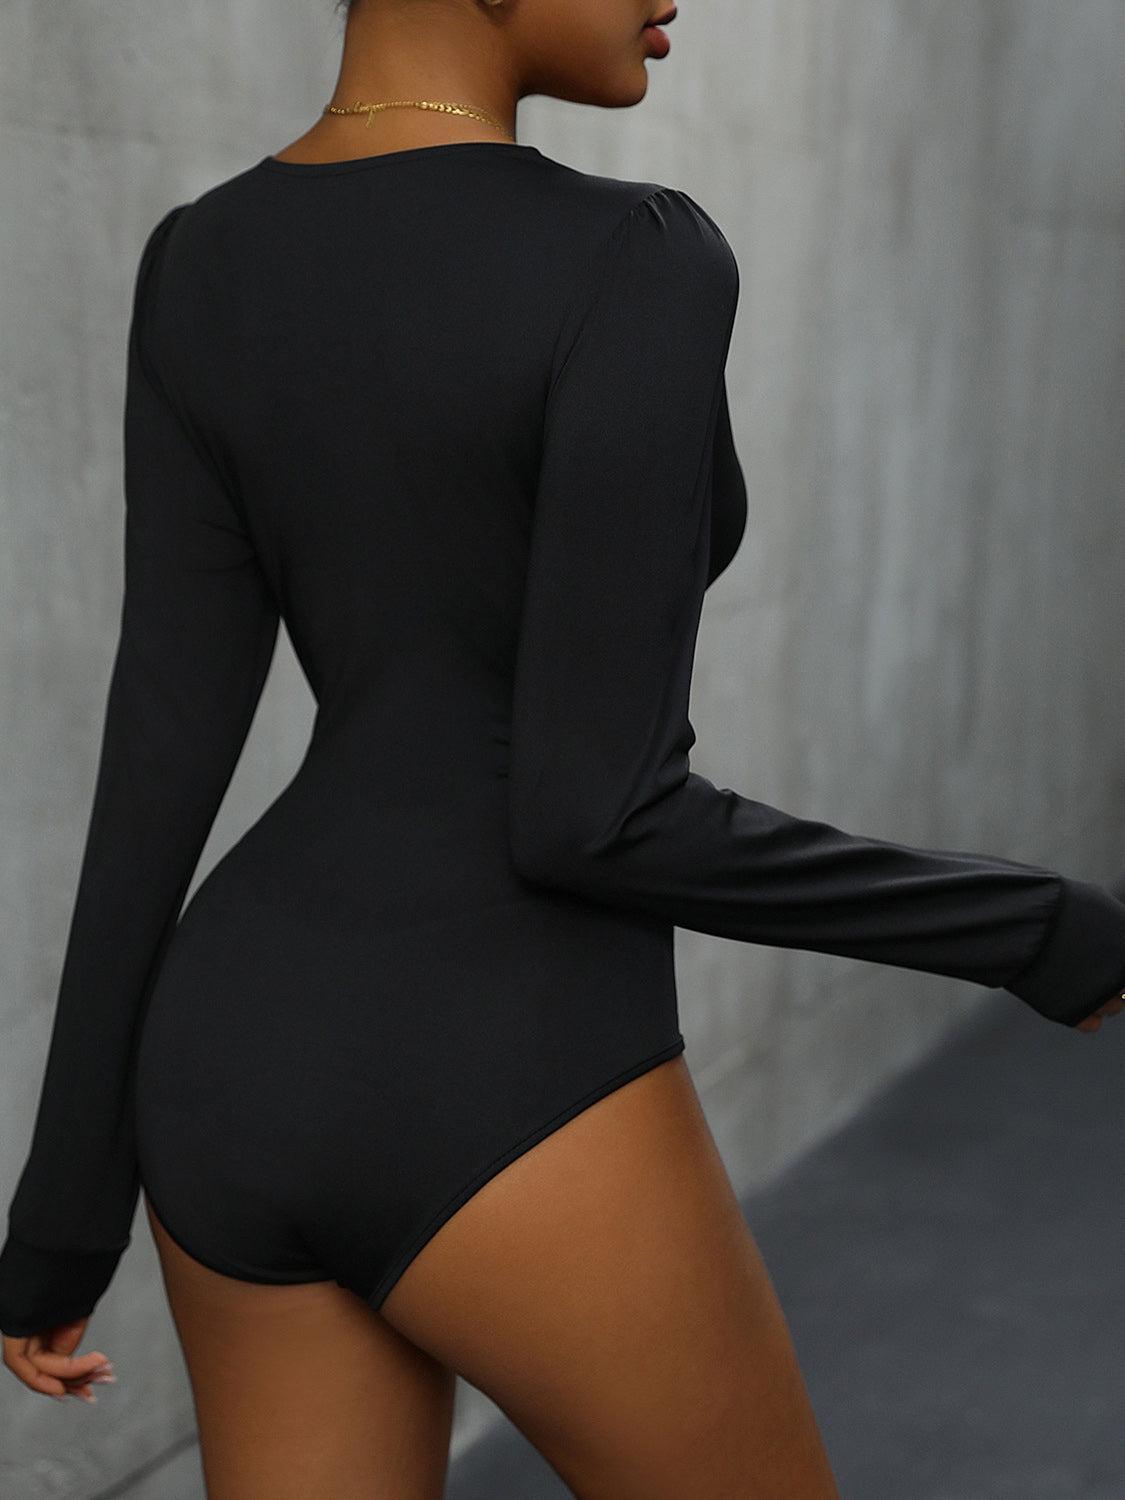 a woman in a black bodysuit is posing for the camera